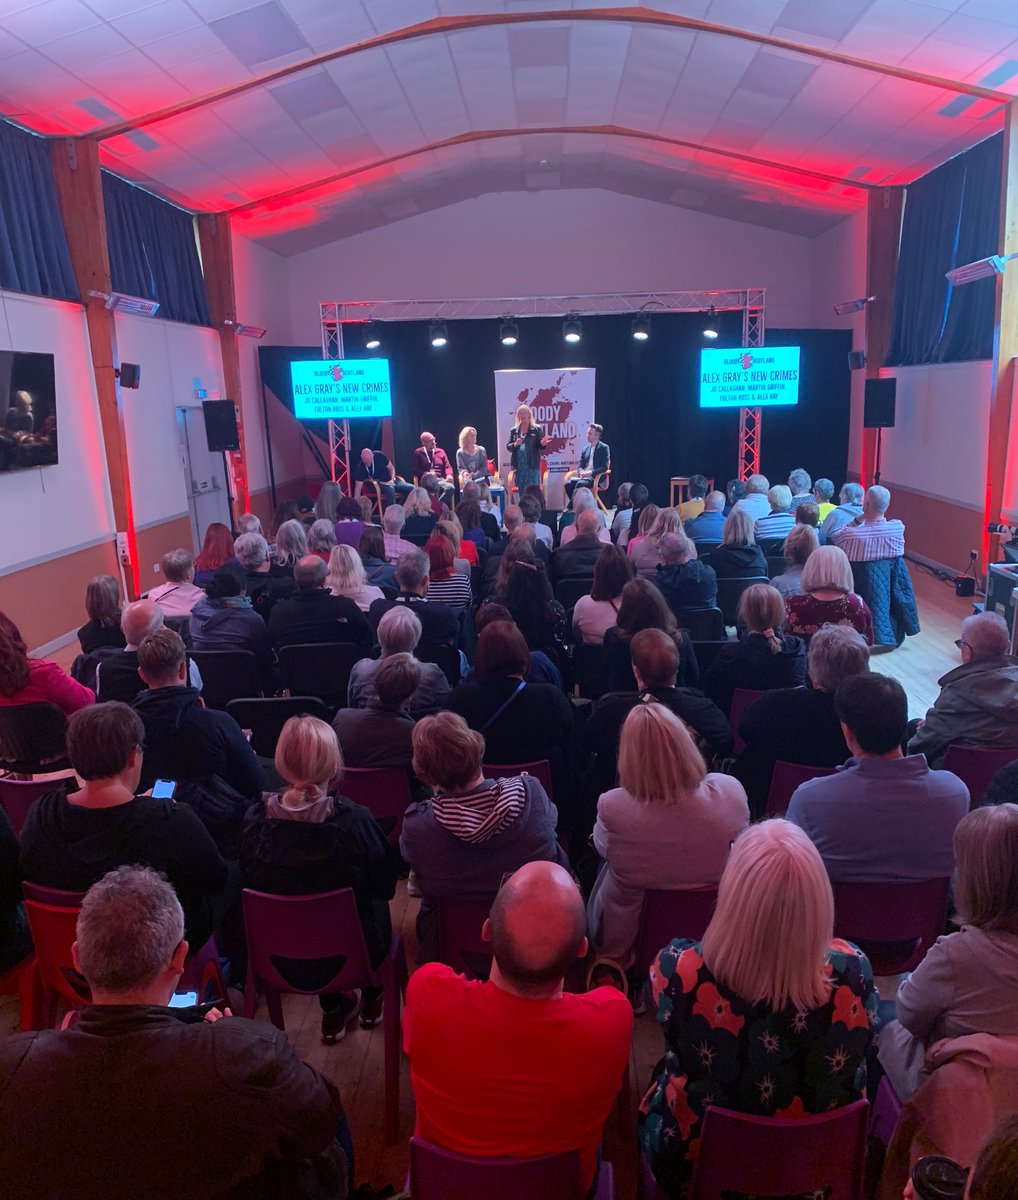 …and we’re off! Full house for Alex Gray’s New Crimes - superb debuts from @AlexHayBooks @FultonLRoss @JoCallaghanKat @FletcherMoss @BloodyScotland